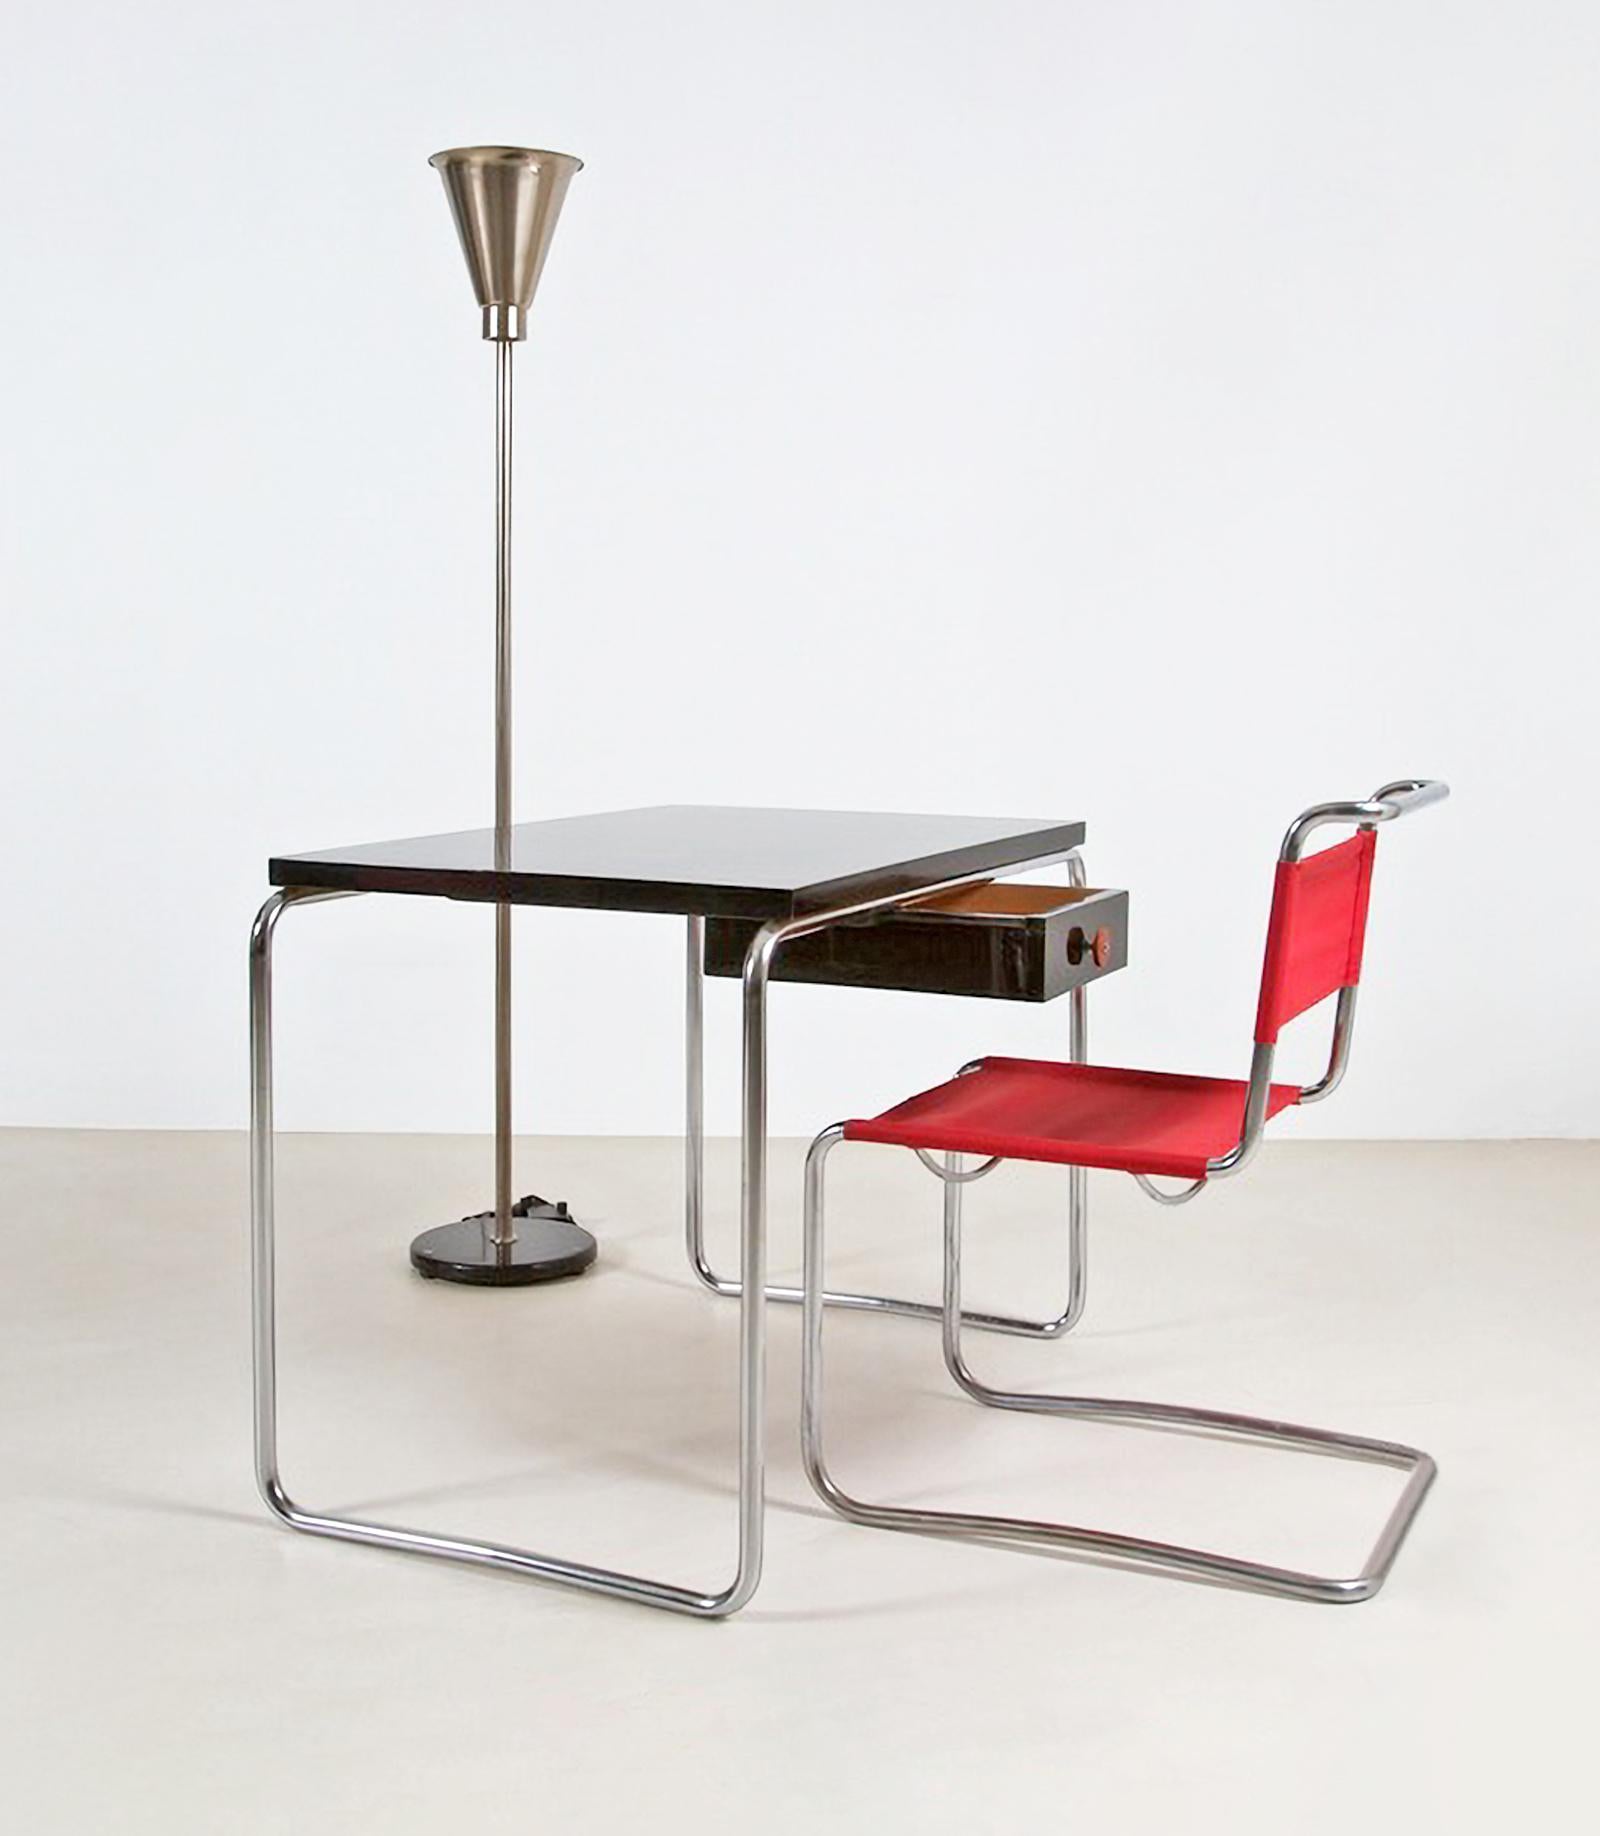 German Bespoke Modernist Tubular Steel Table in Chromed Metal and Glossy Lacquered Wood For Sale